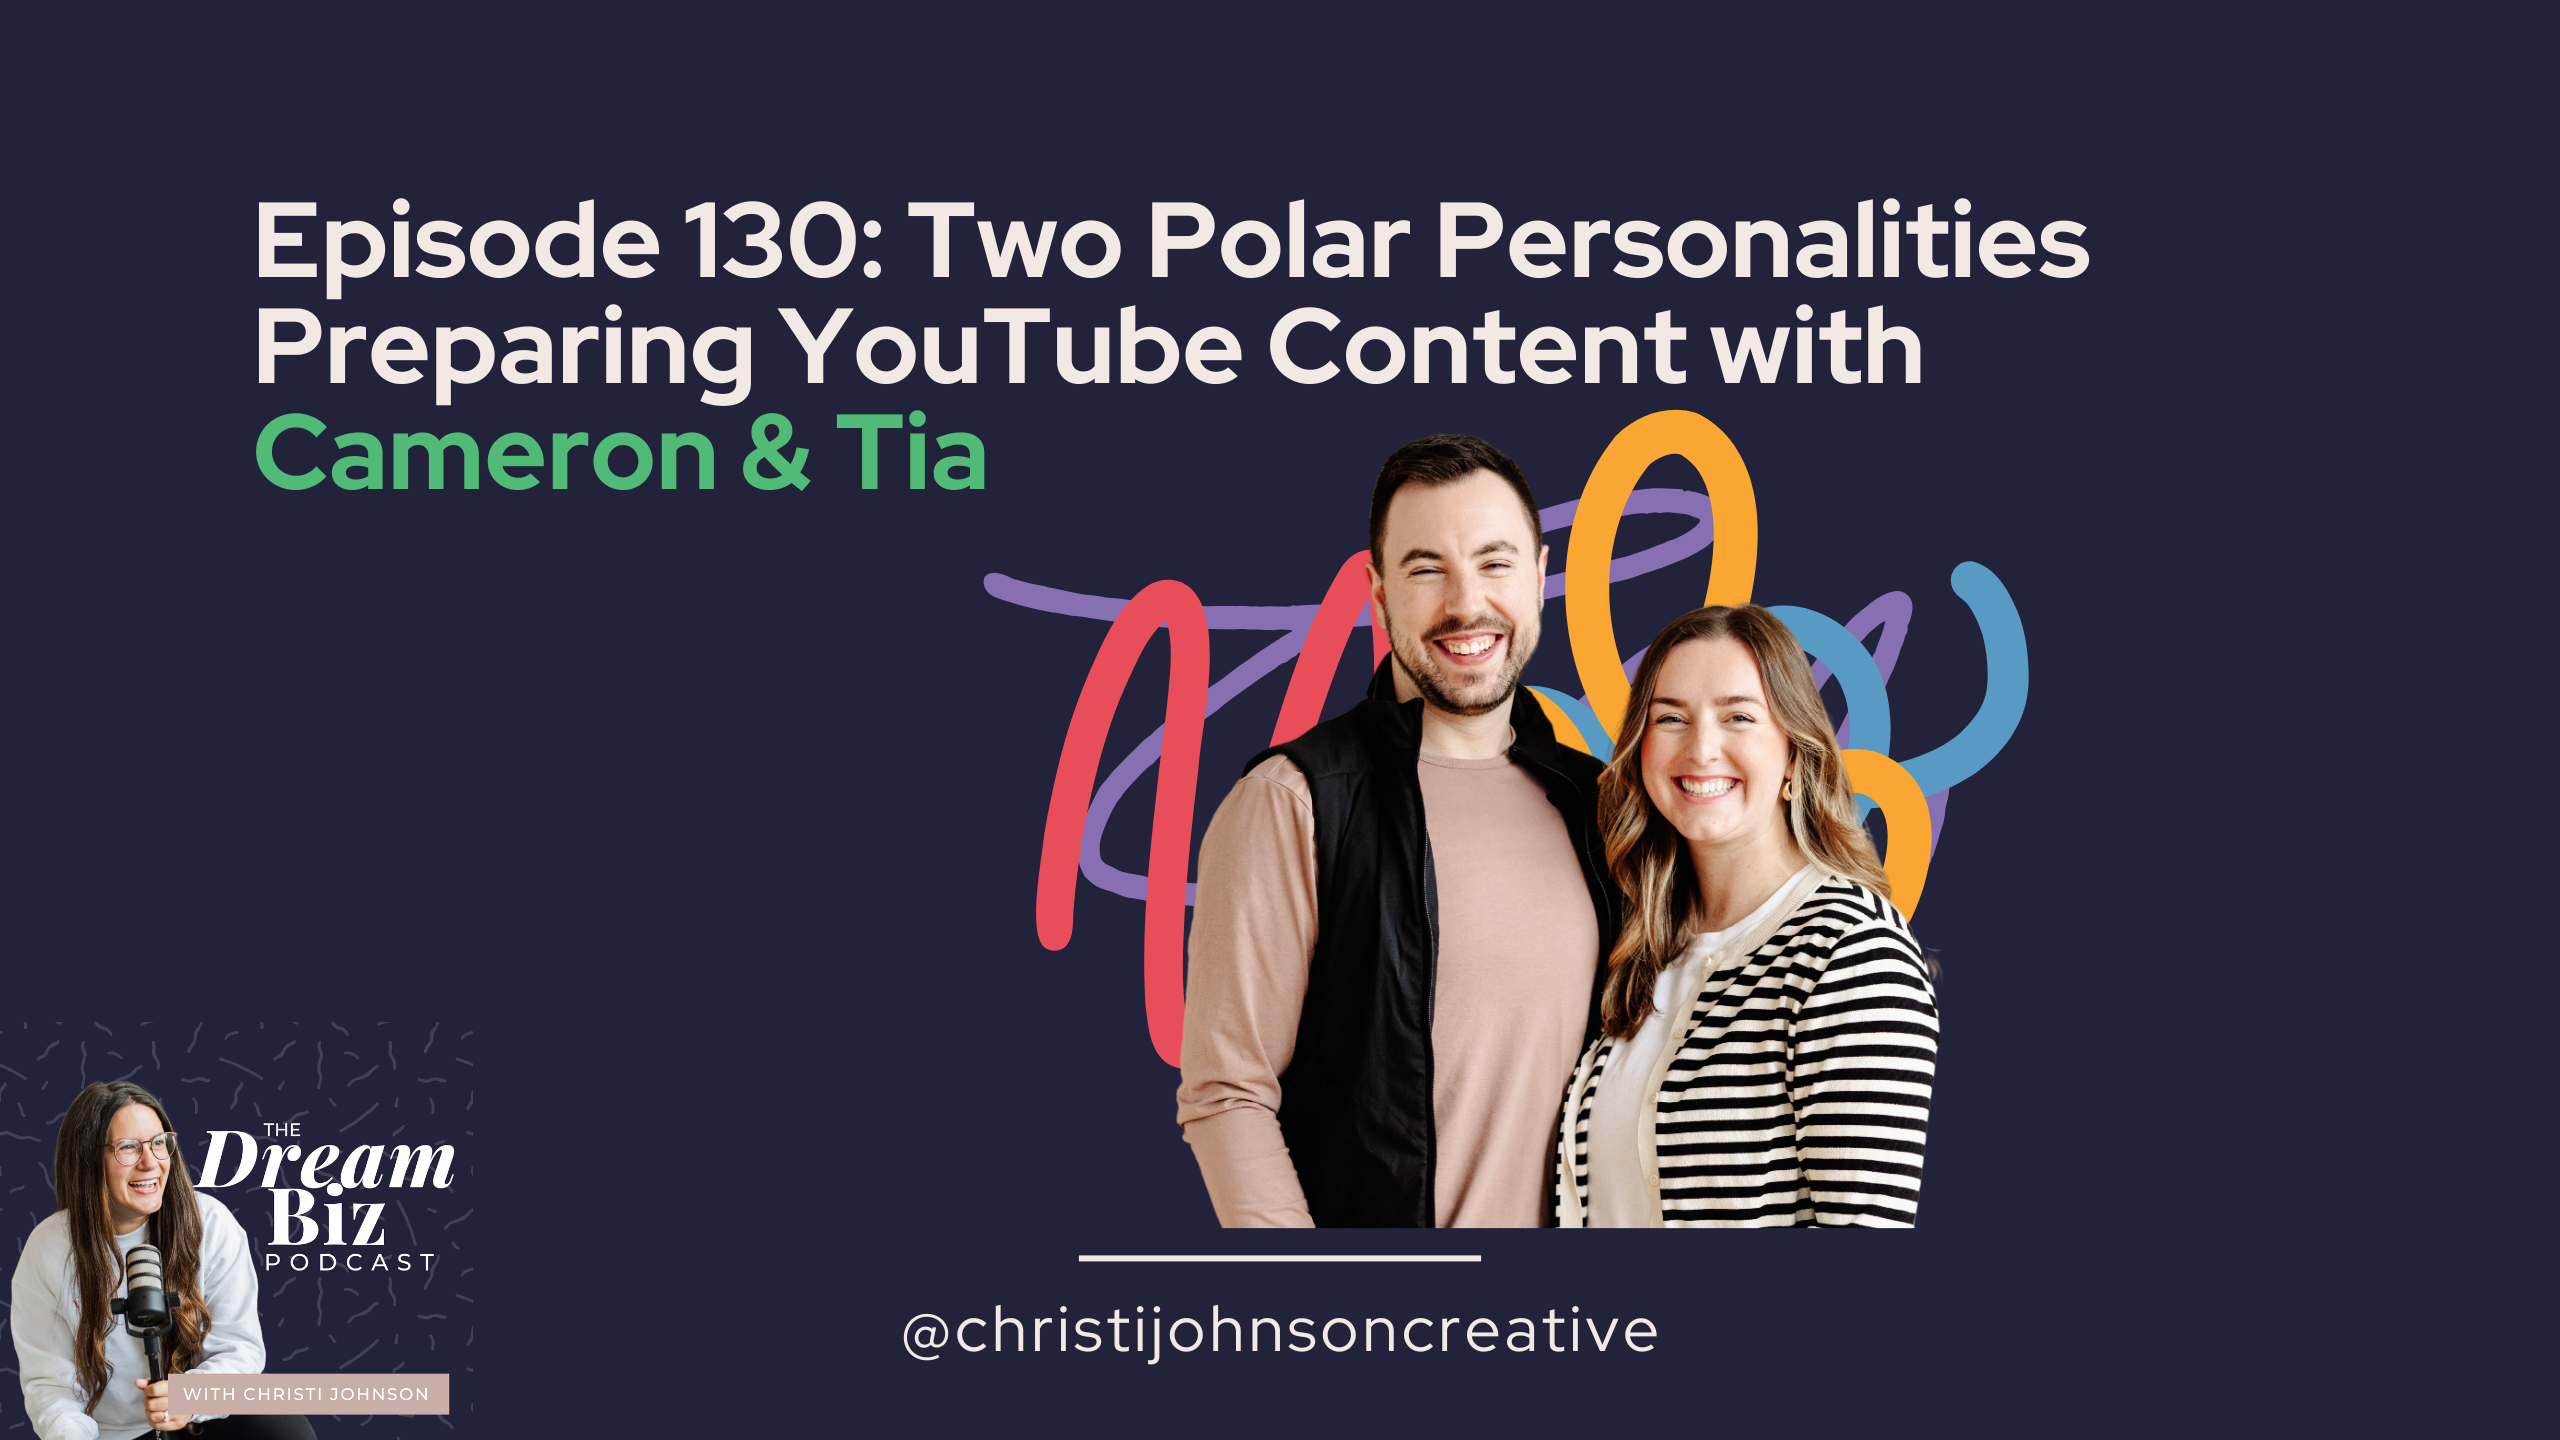 ID: Episode 130: Two Polar Personalities Preparing Youtube Content with Cameron & Tia.